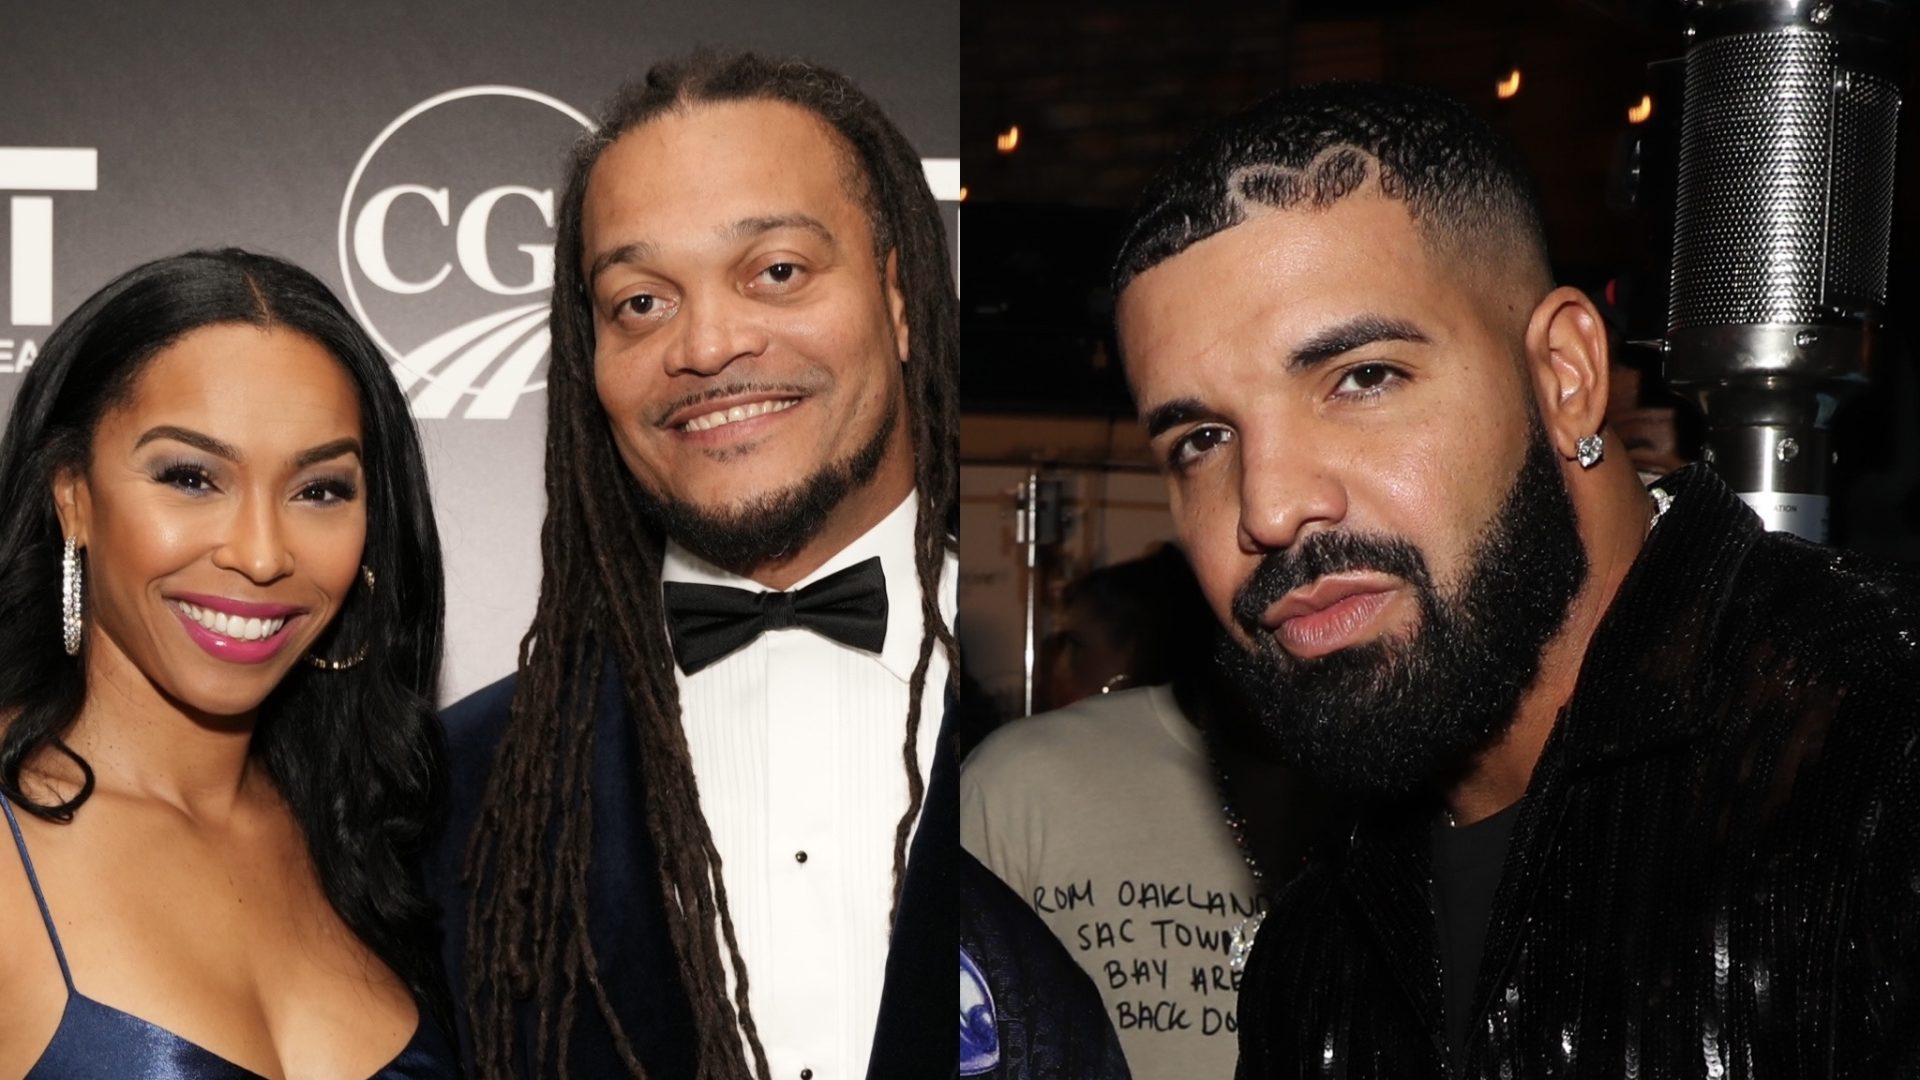 Whew! Channing Crowder Reacts After Drake Goes Viral For Complimenting His Wife (WATCH) thumbnail